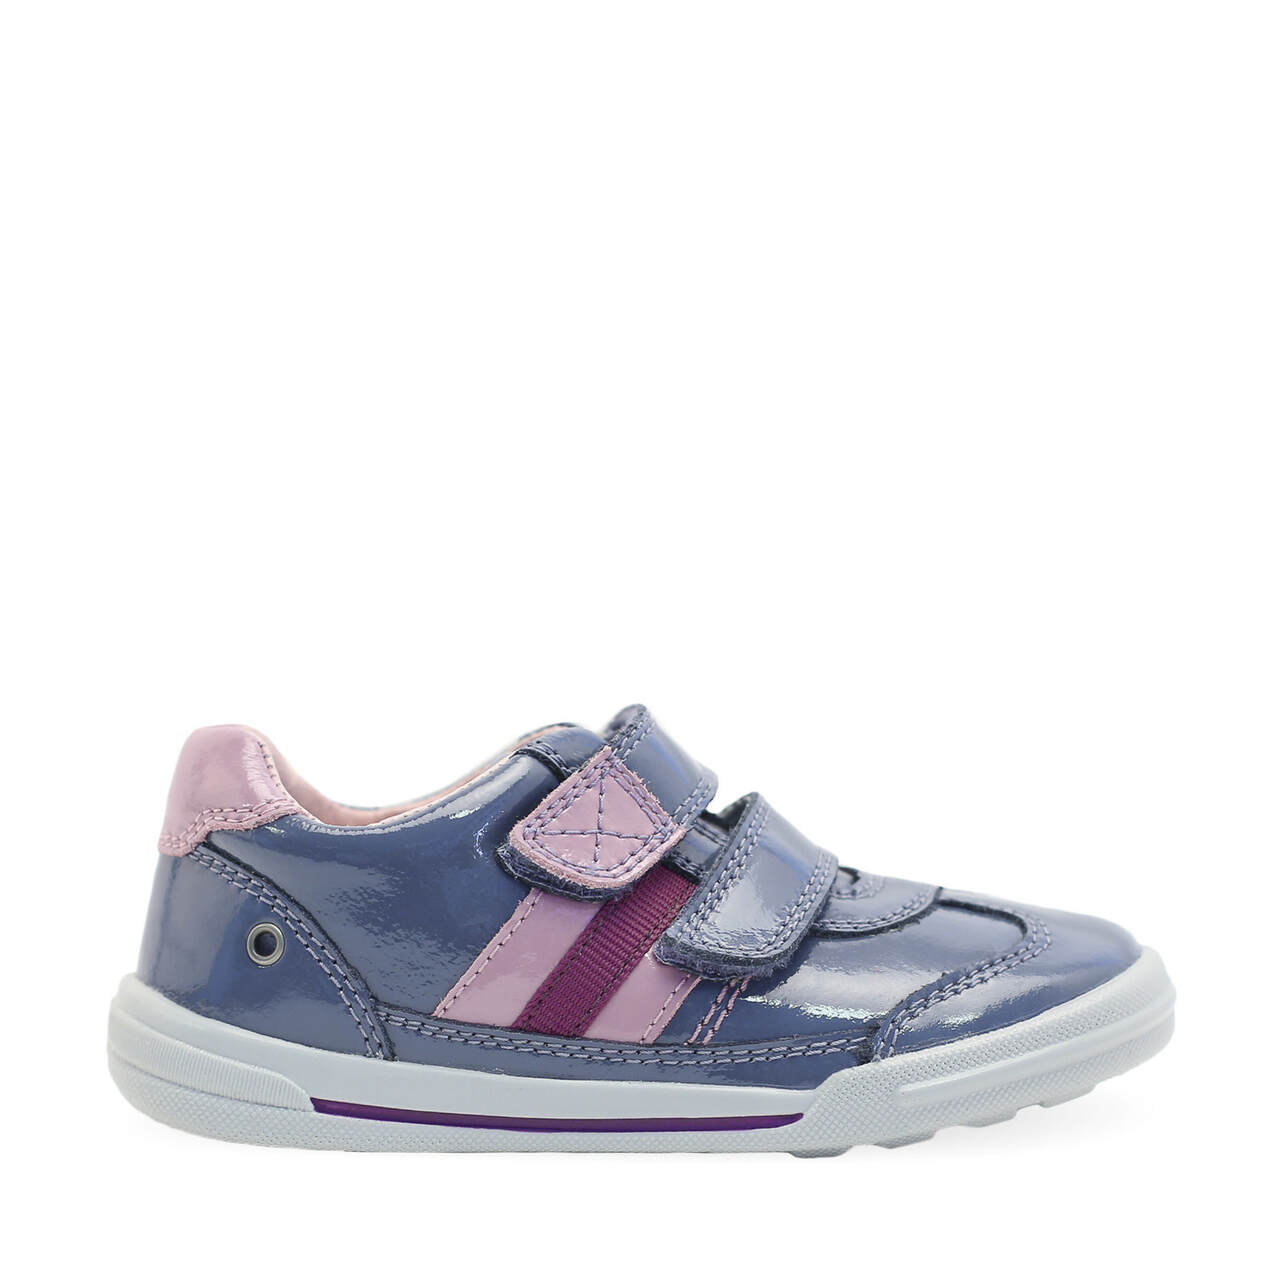 A girls casual shoe by Start Rite, style Seesaw, in blue and purple patent leather with double velcro fastening. Right side view.